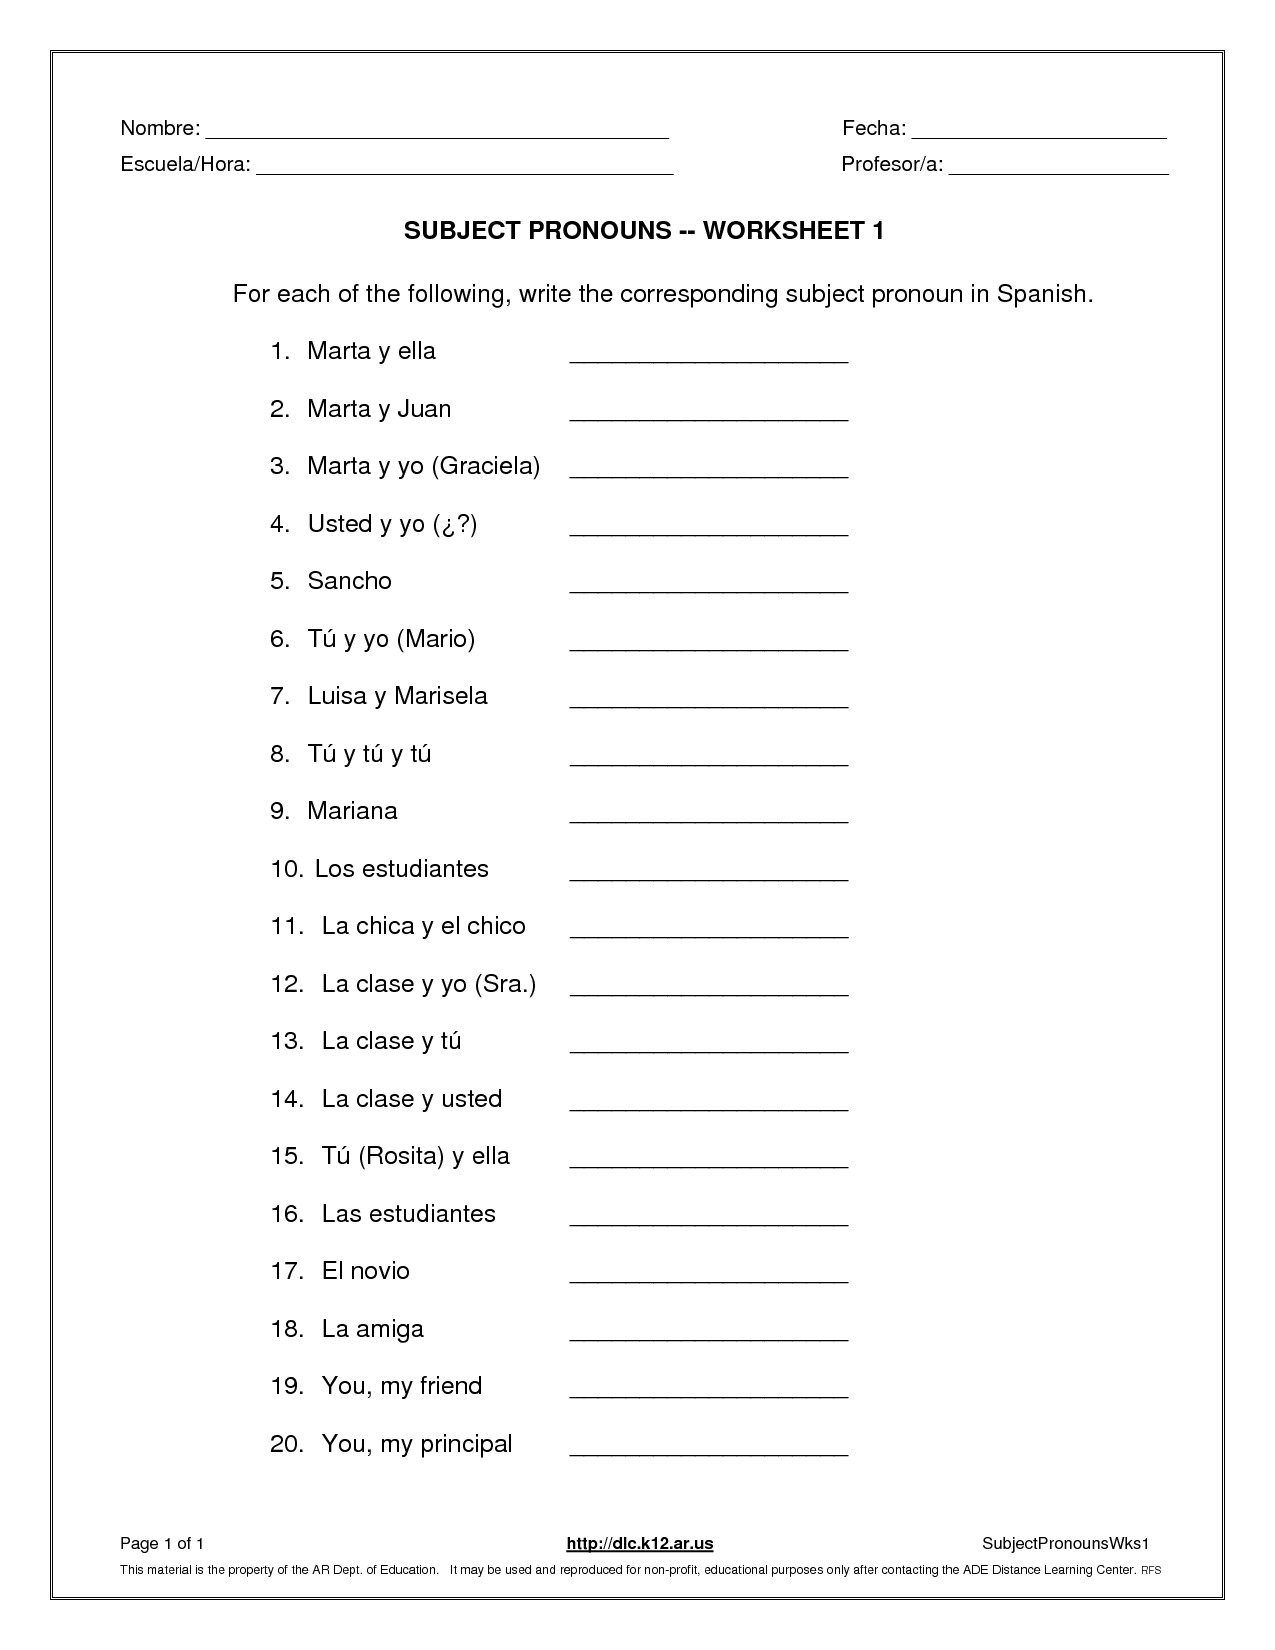 identify-subject-and-object-pronoun-and-list-them-worksheet-turtle-diary